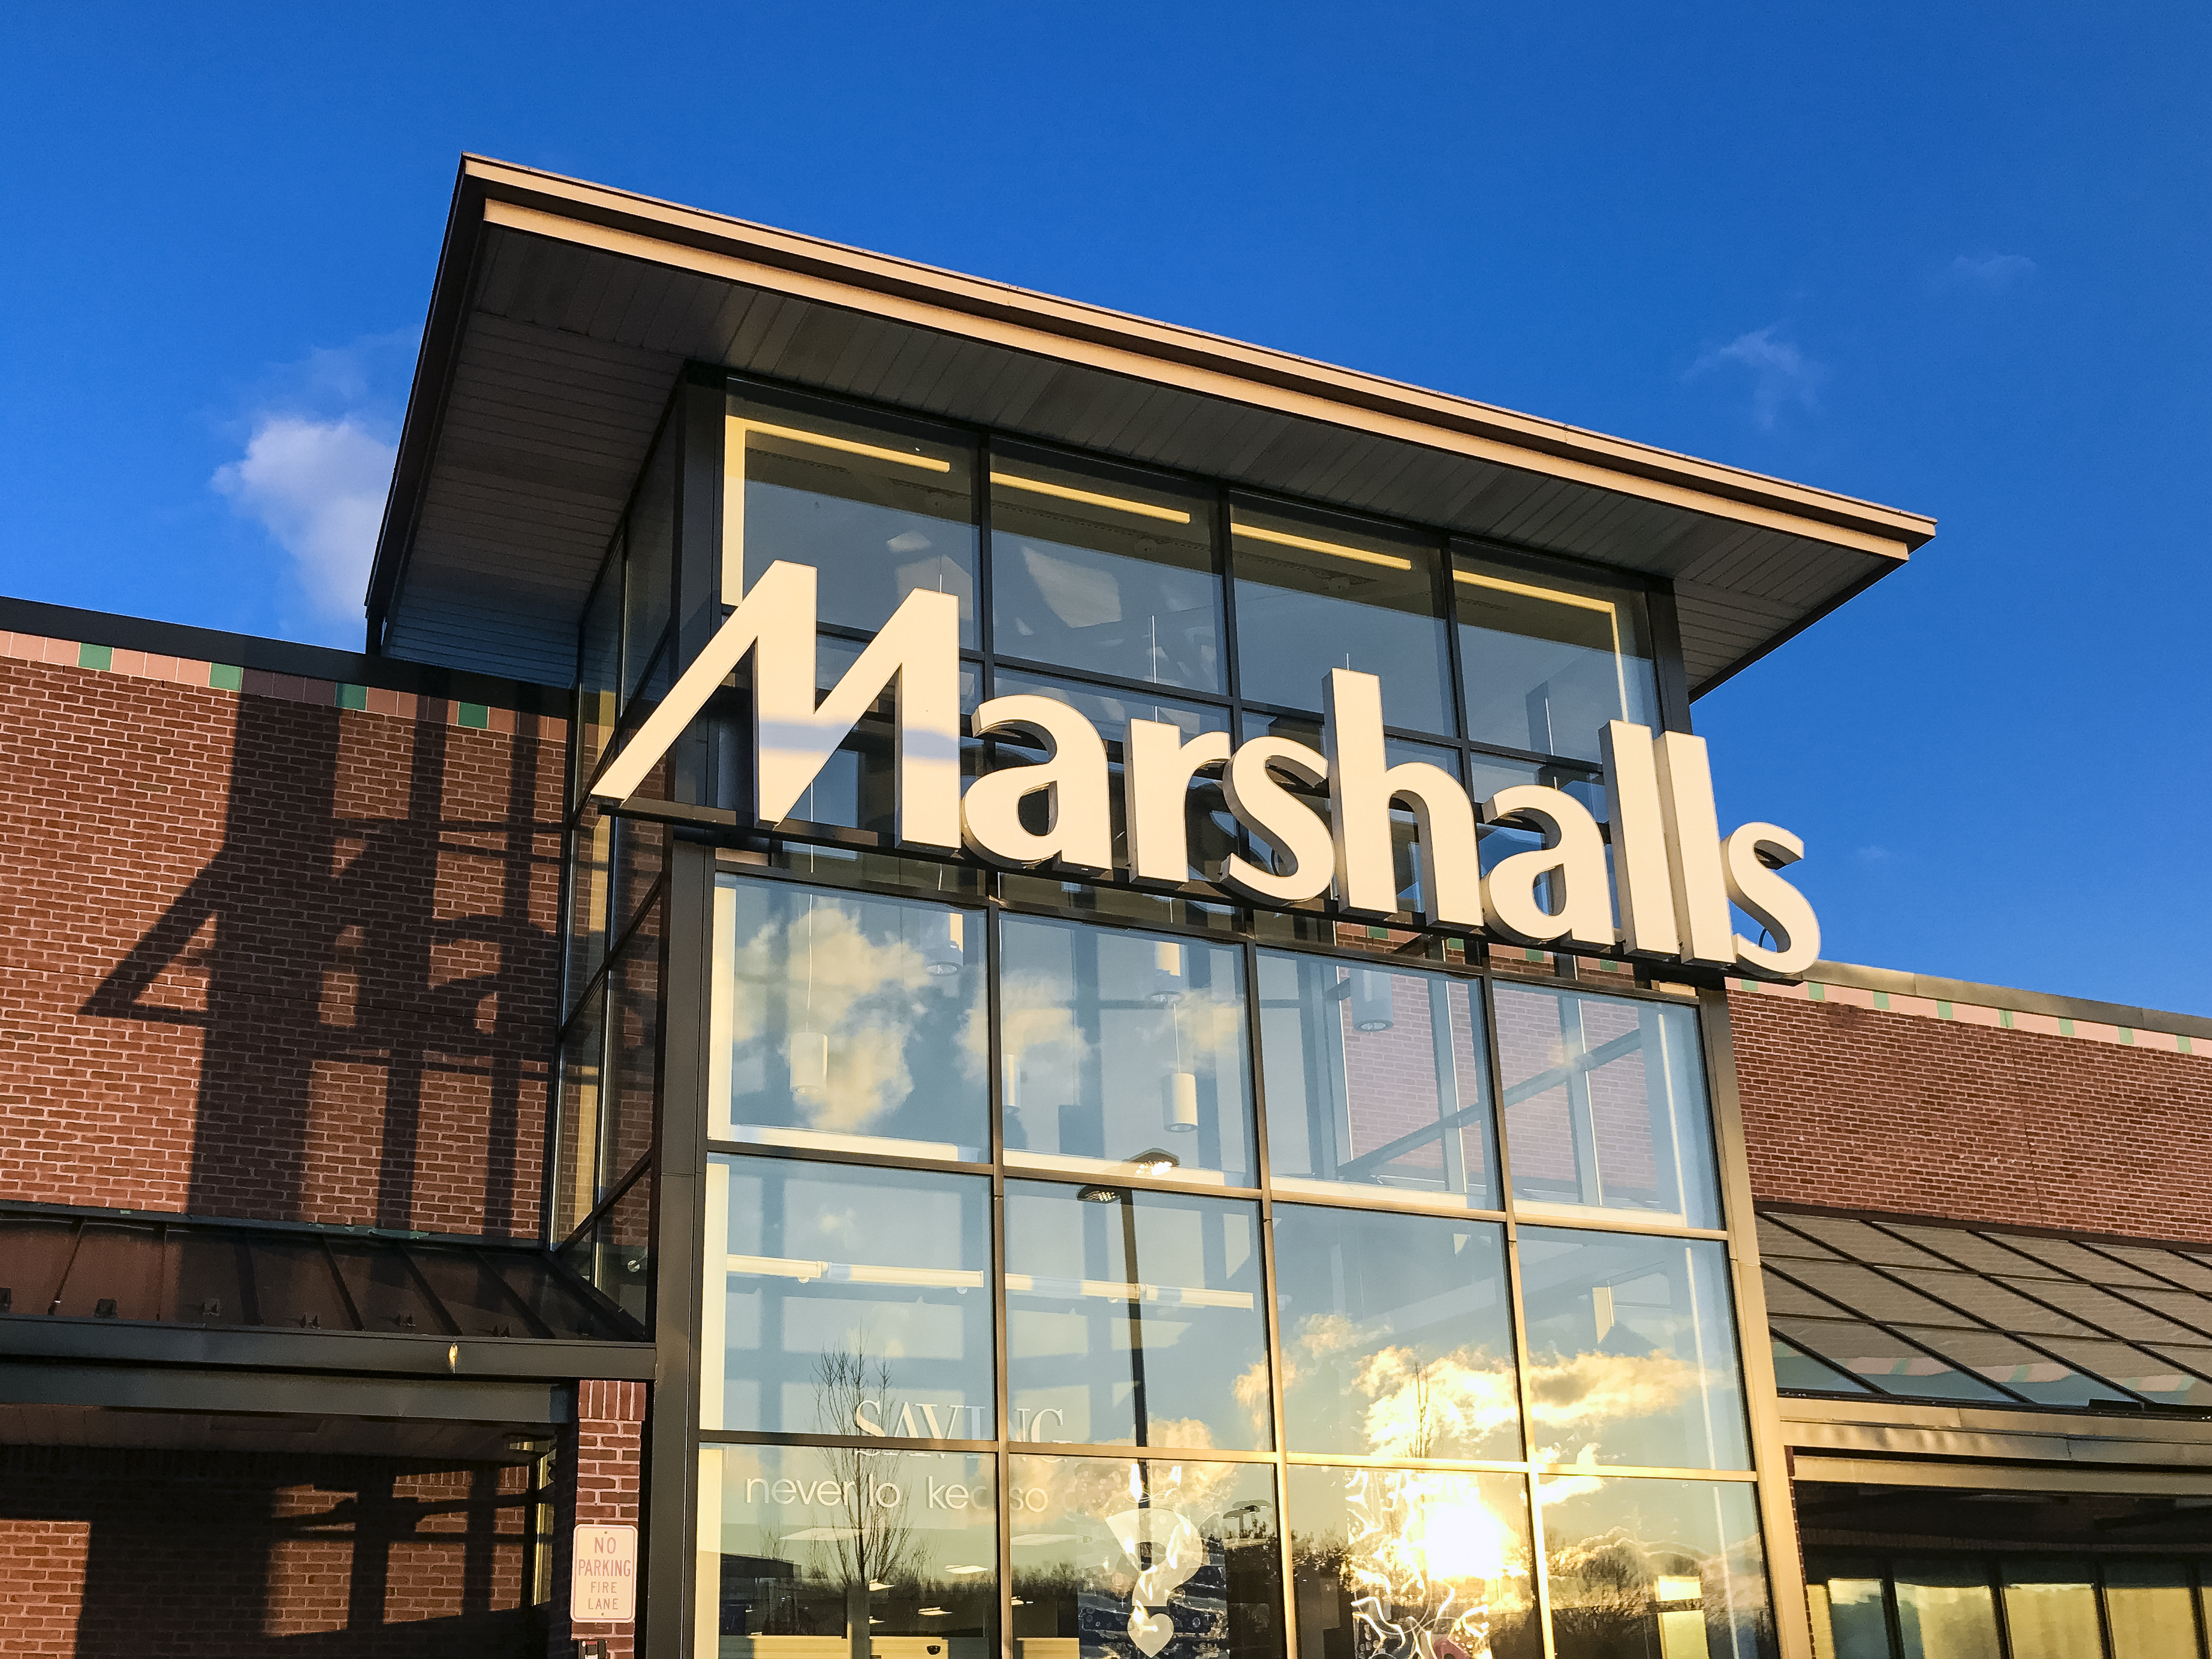 Marshalls' Online Store Is Finally Live, and Yes, There Are Amazing Deals on Designer Clothing